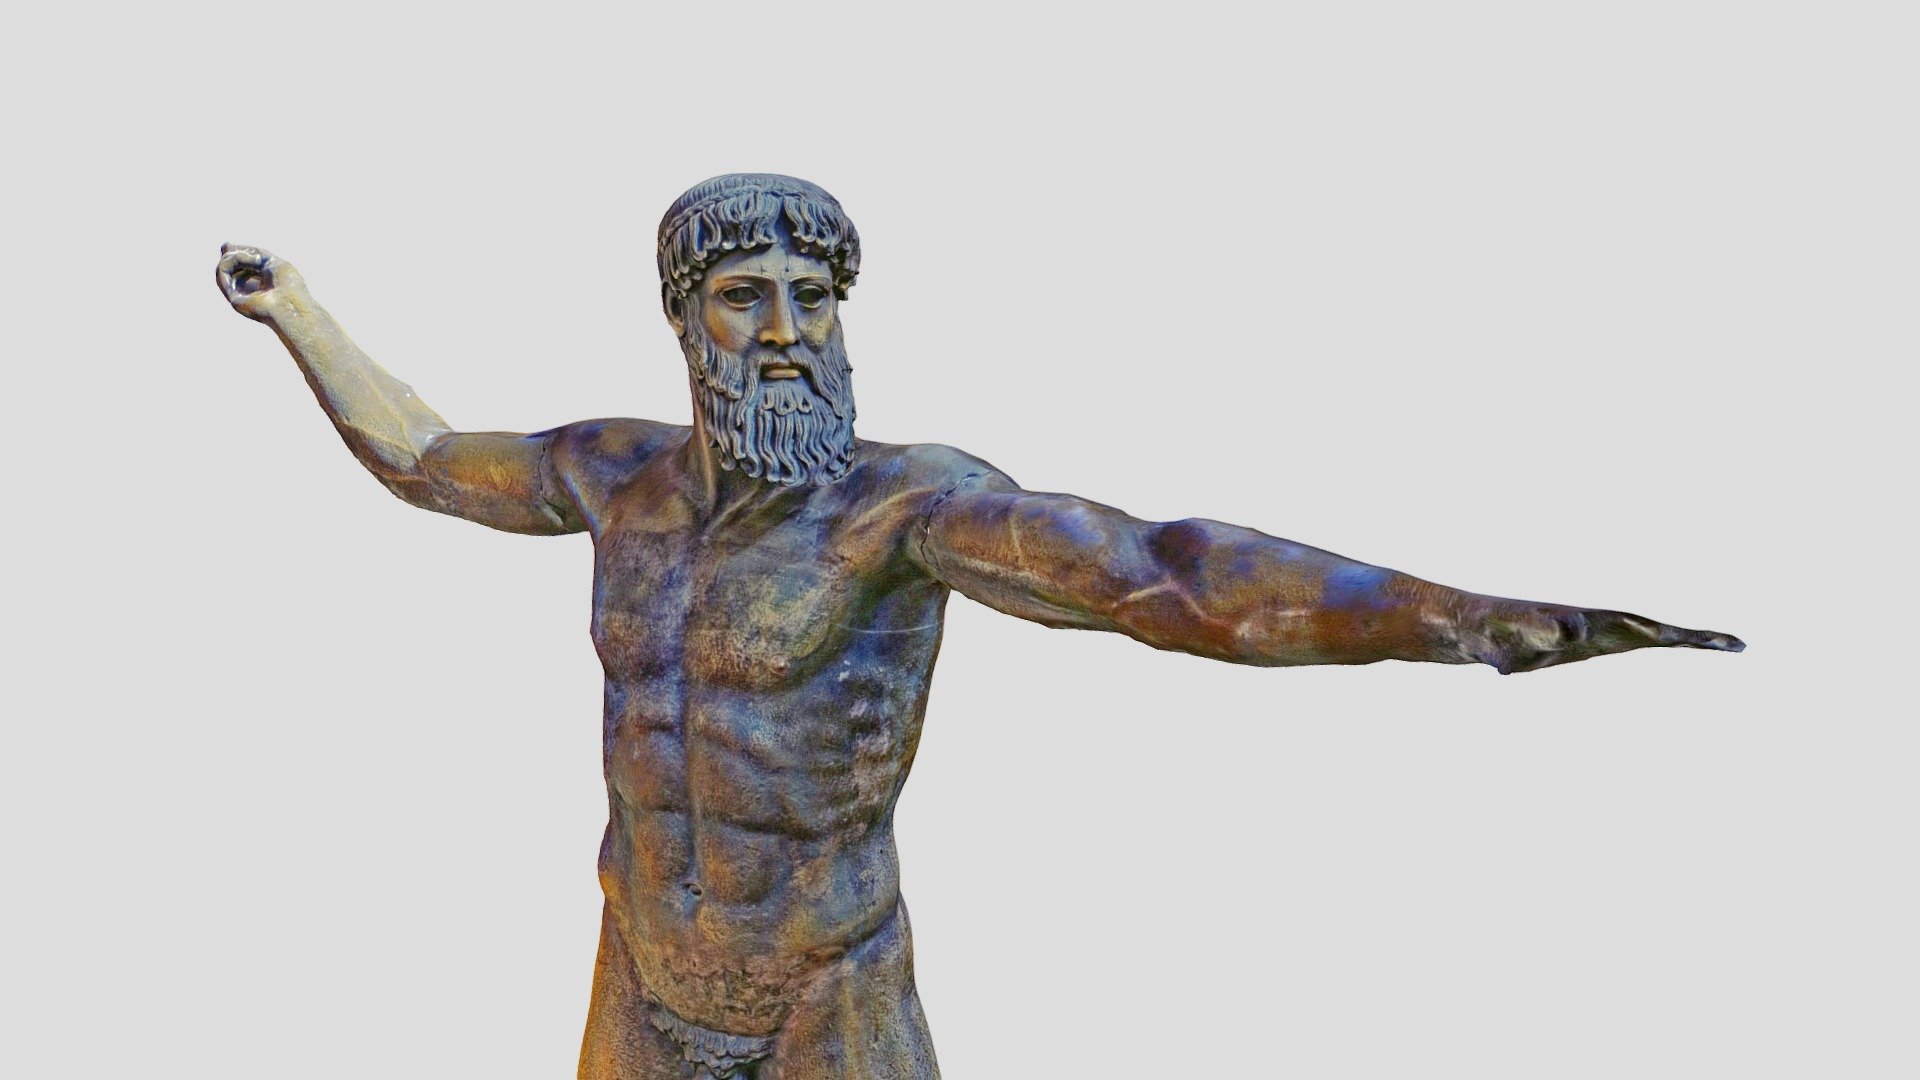 Bronze statue of most likely Zeus, scanned at the Museum of Classical Archaeology in Cambridge, UK.

Based on a 67x12MP dataset shot on a 1/2.3